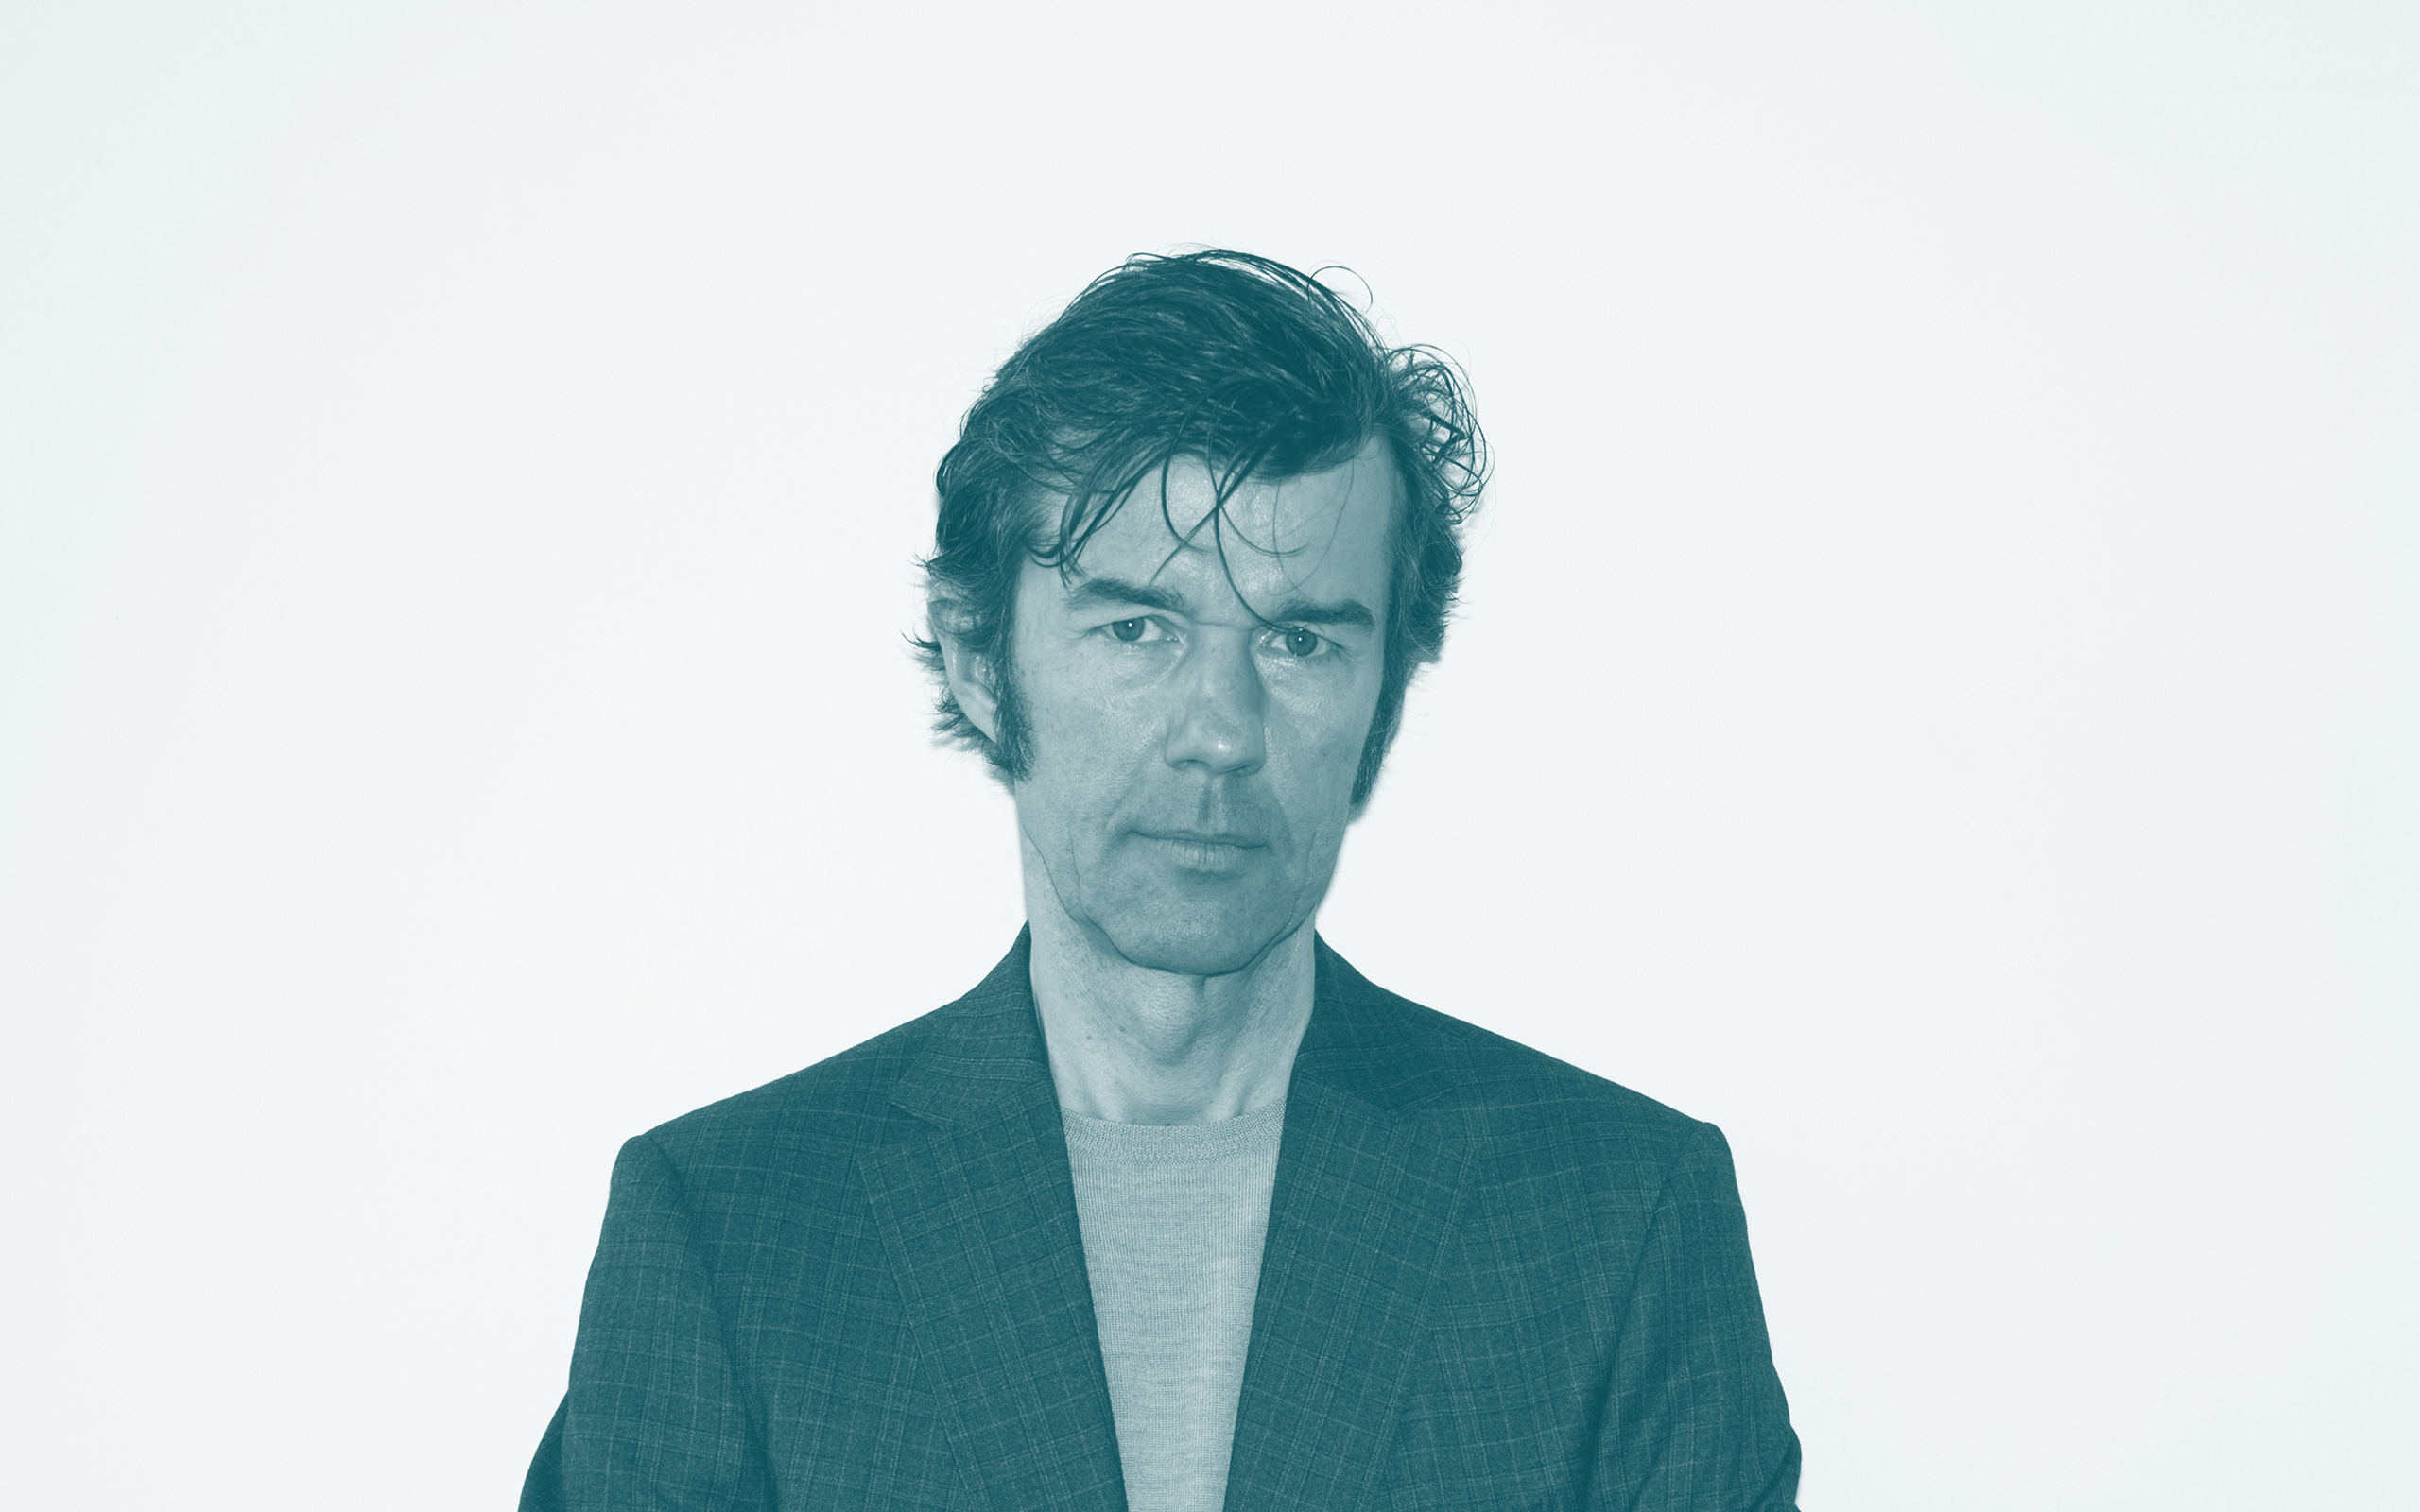 Designer, beauty advocate and Phaidon author, Stefan Sagmeister